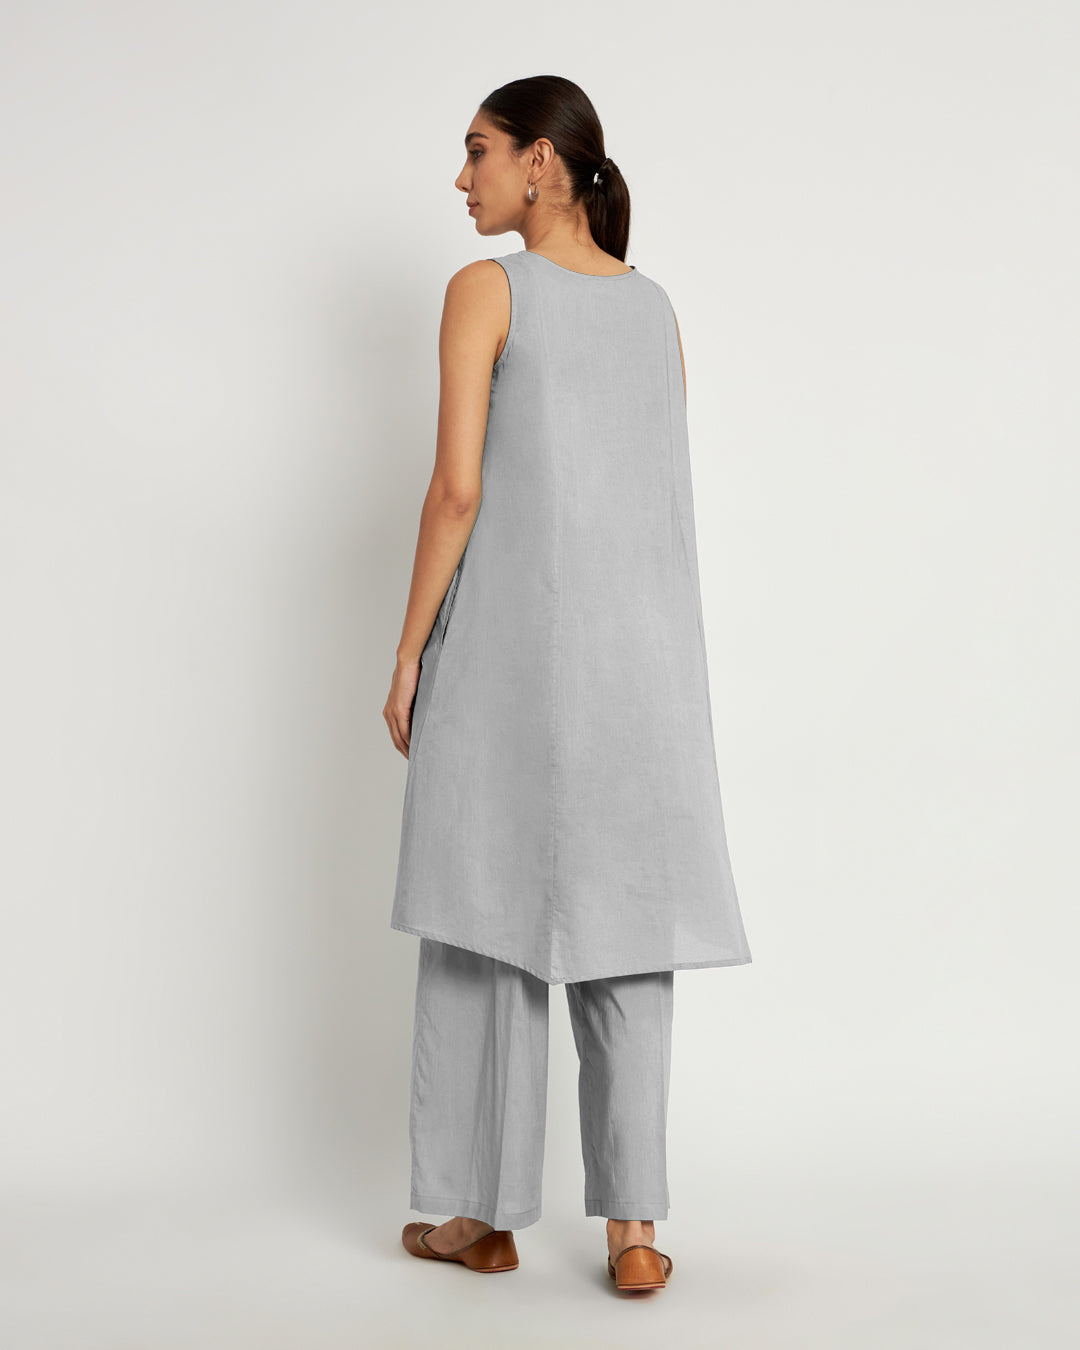 Iced Grey Sleeveless A-Line Solid Kurta (Without Bottoms)